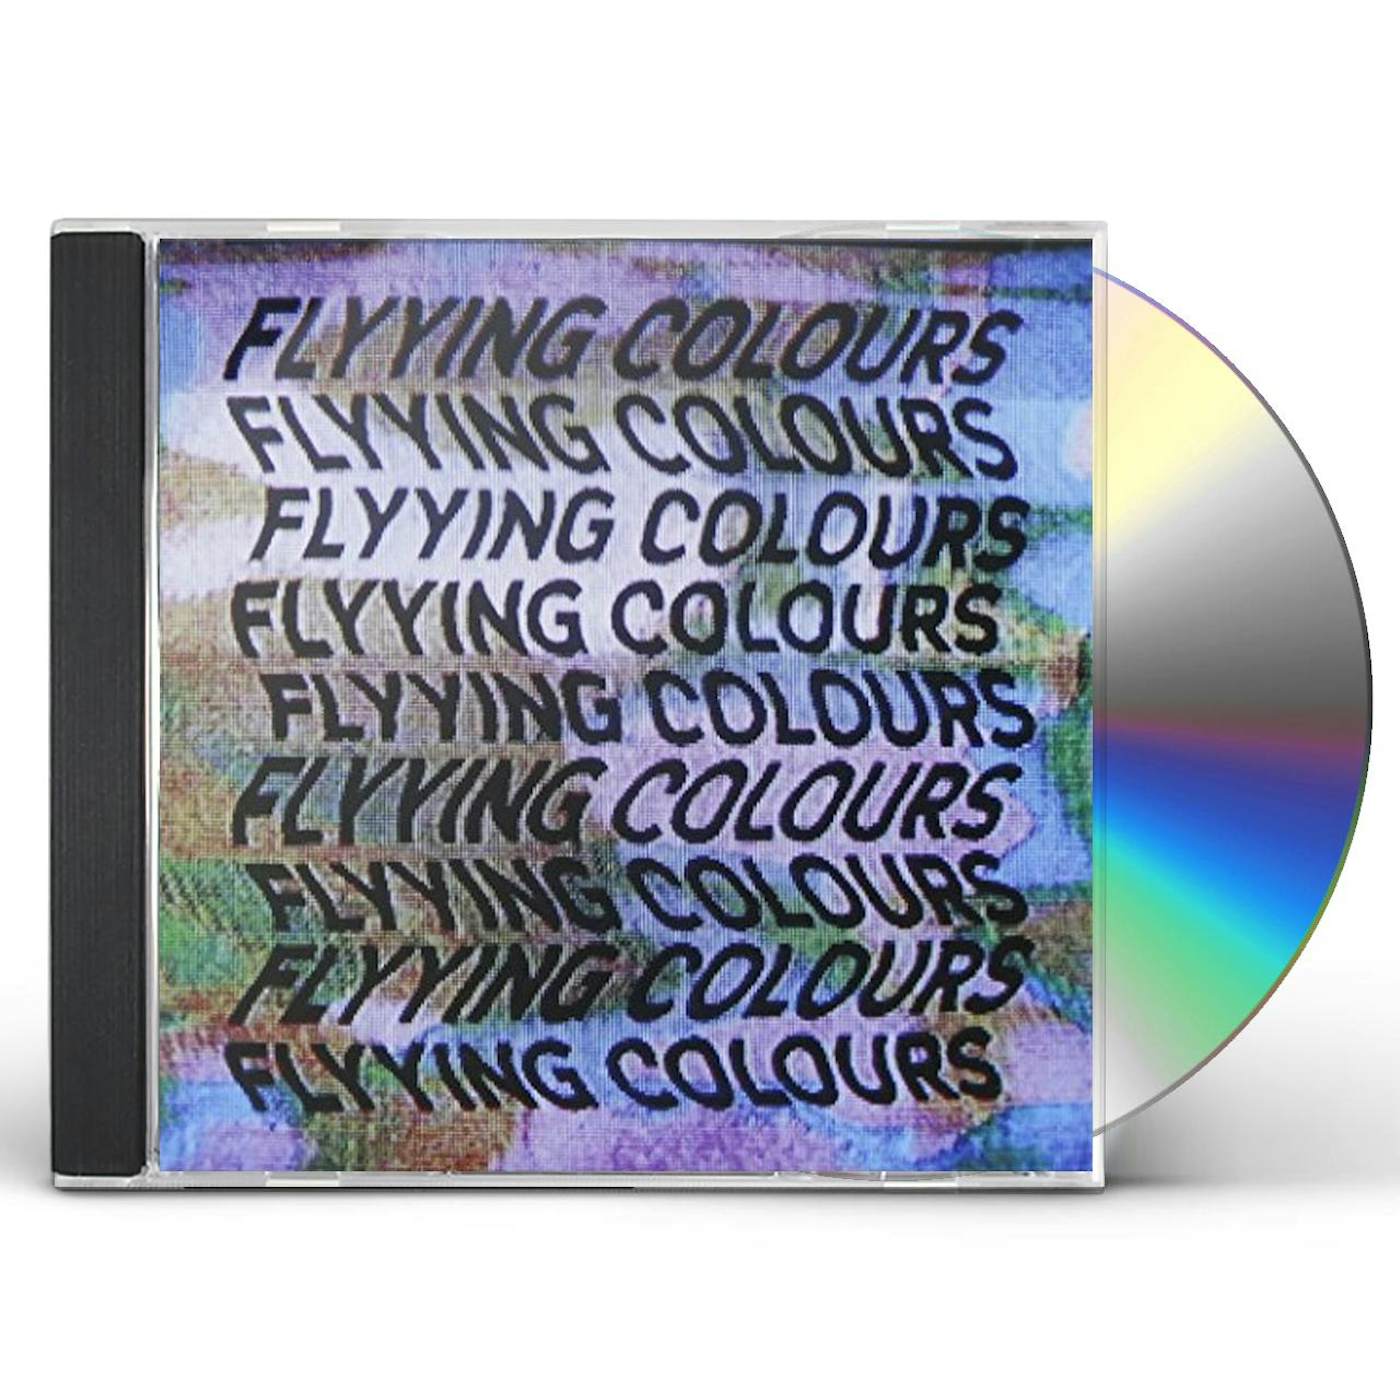 FLYYING COLOURS EP CD